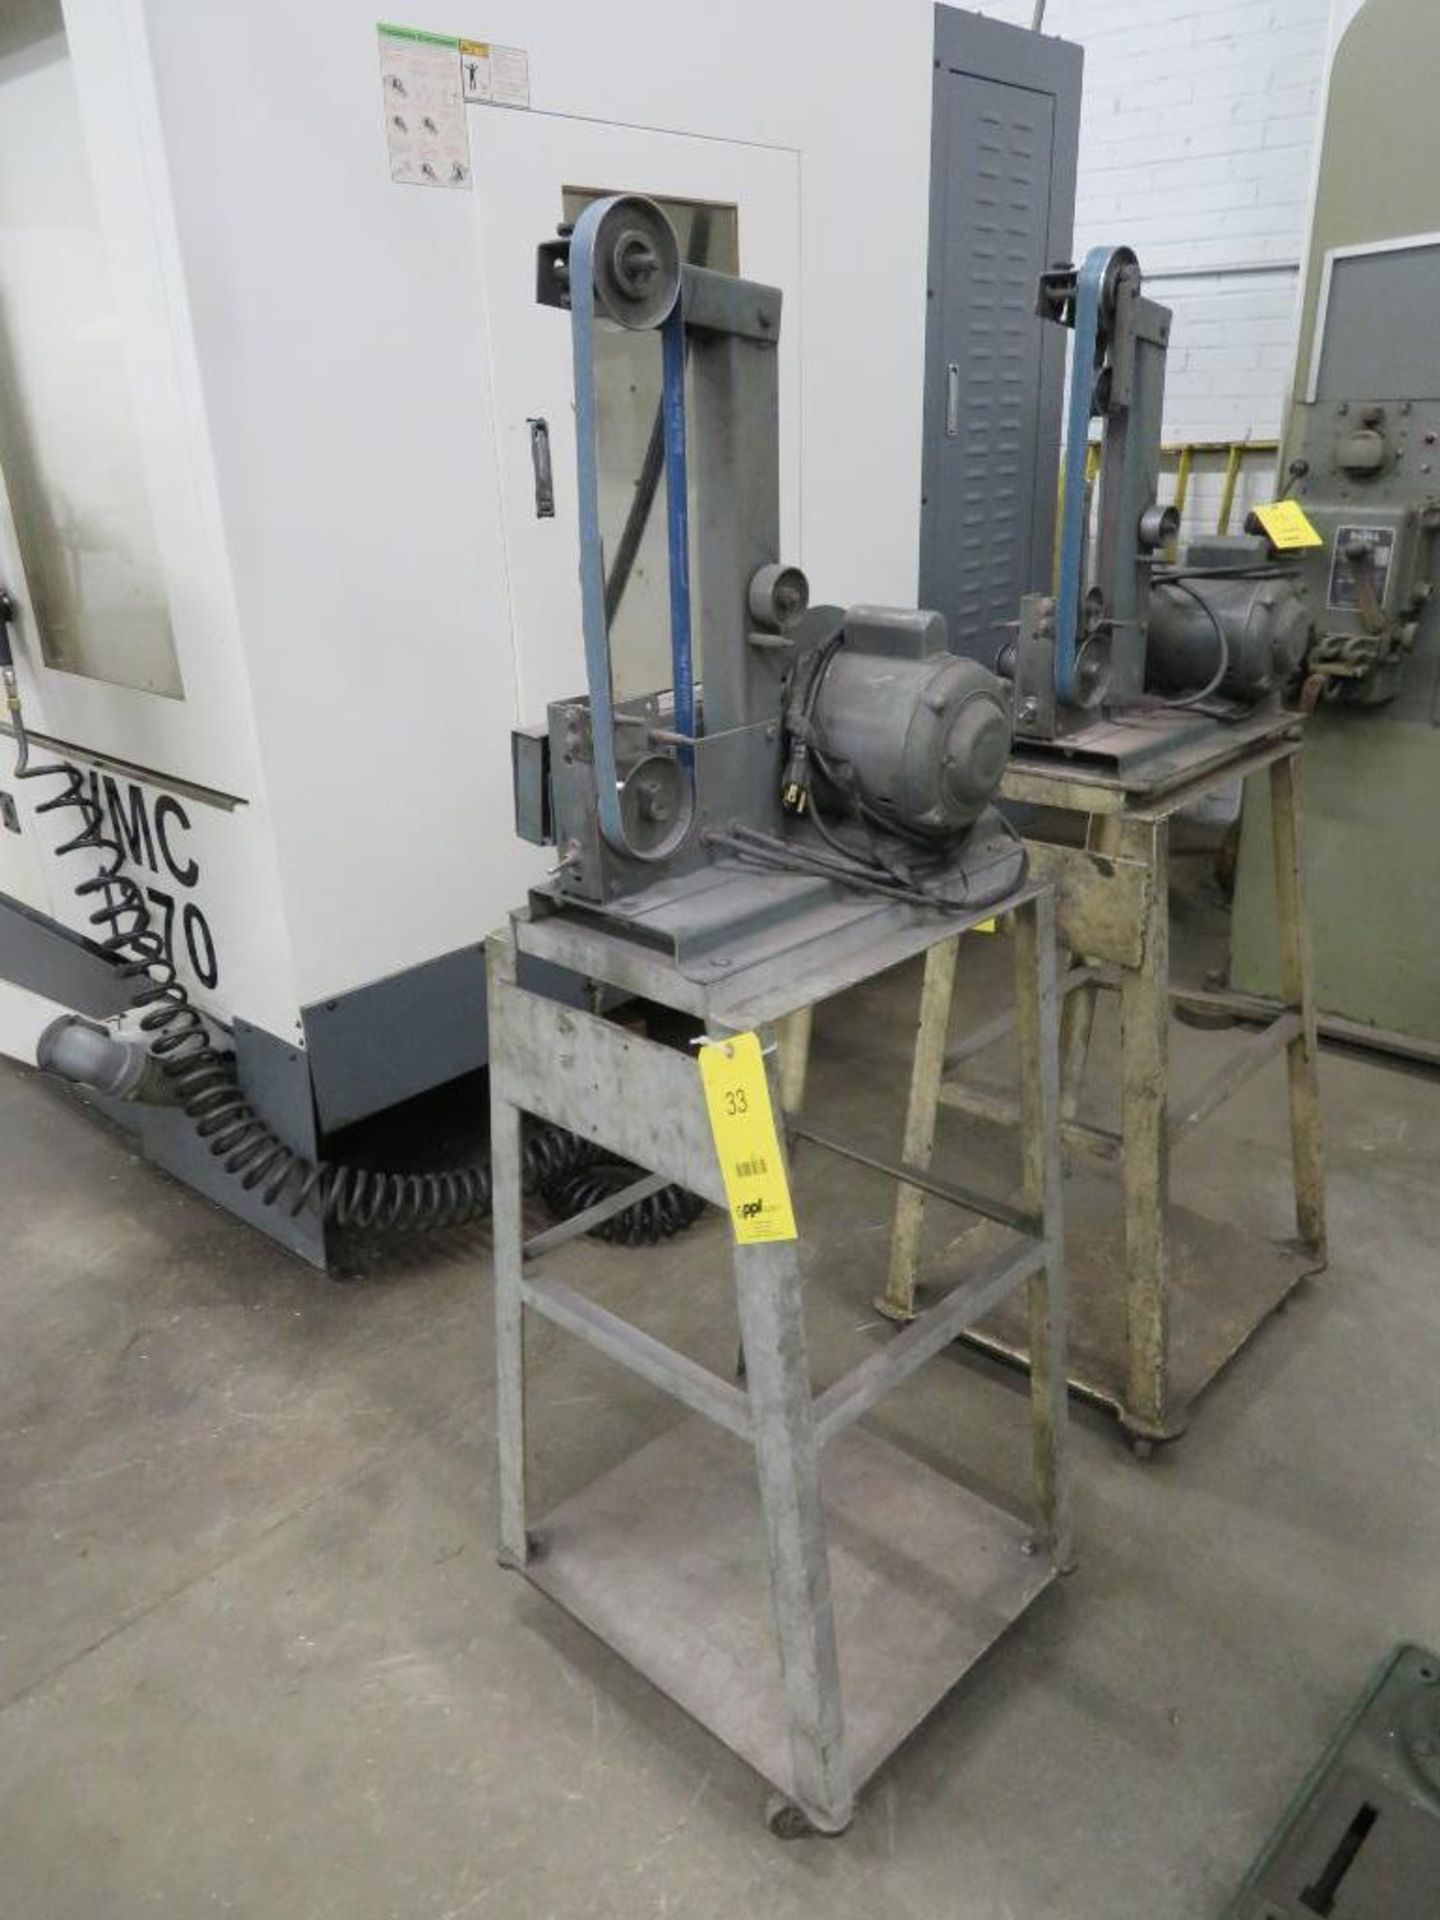 1 in. Bench Top Band Sander with Stand